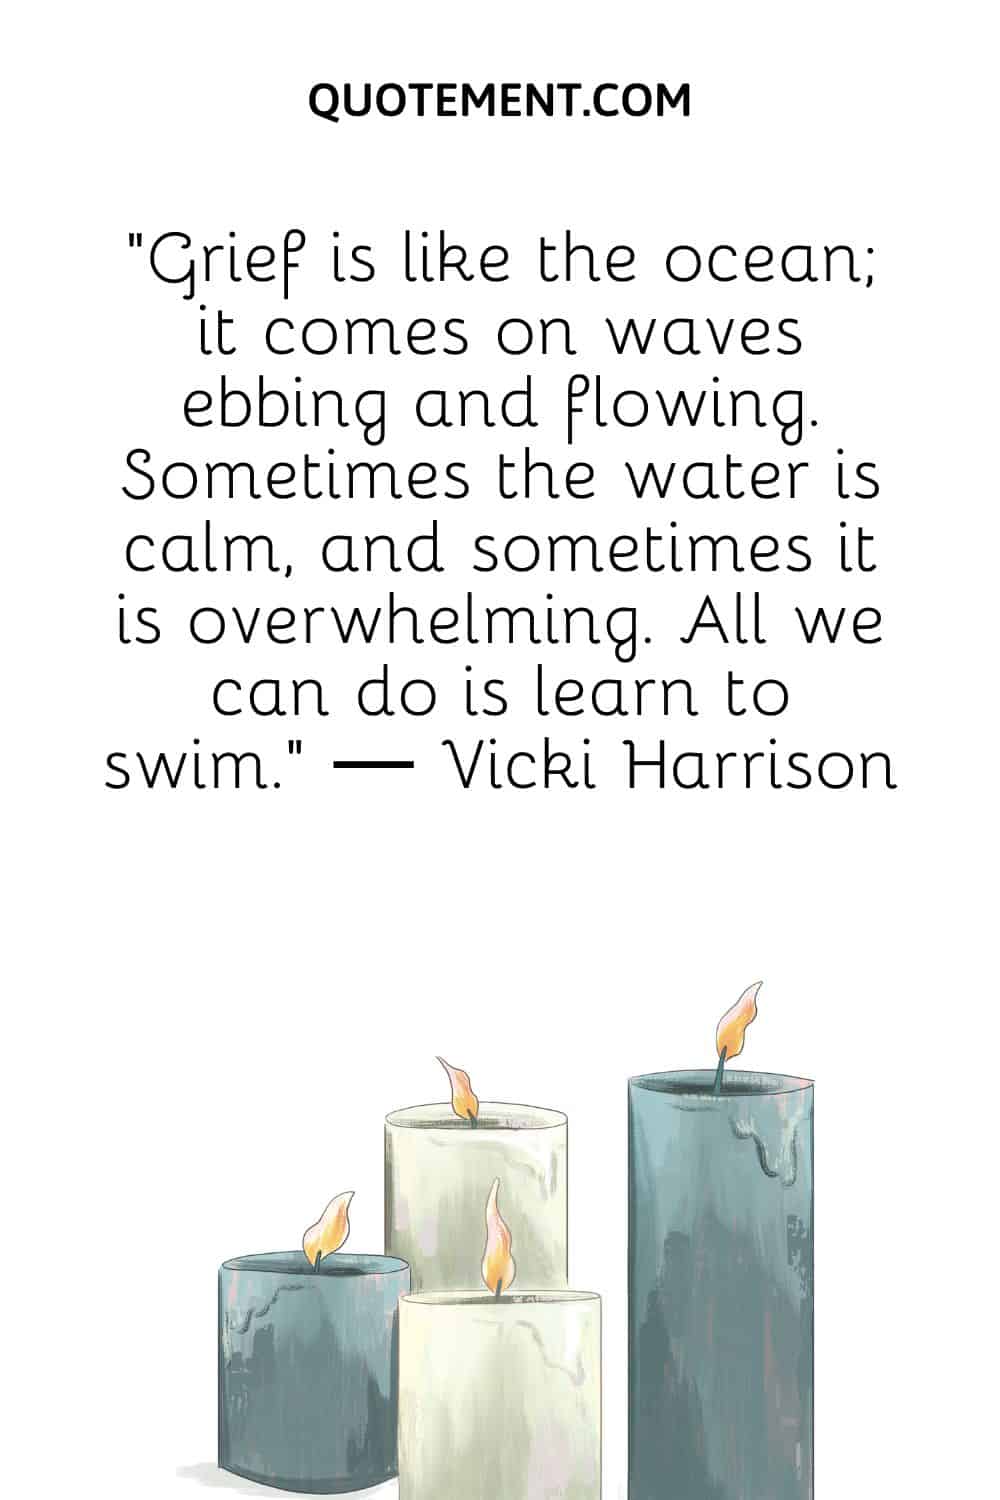 “Grief is like the ocean; it comes on waves ebbing and flowing. Sometimes the water is calm, and sometimes it is overwhelming. All we can do is learn to swim.” ― Vicki Harrison